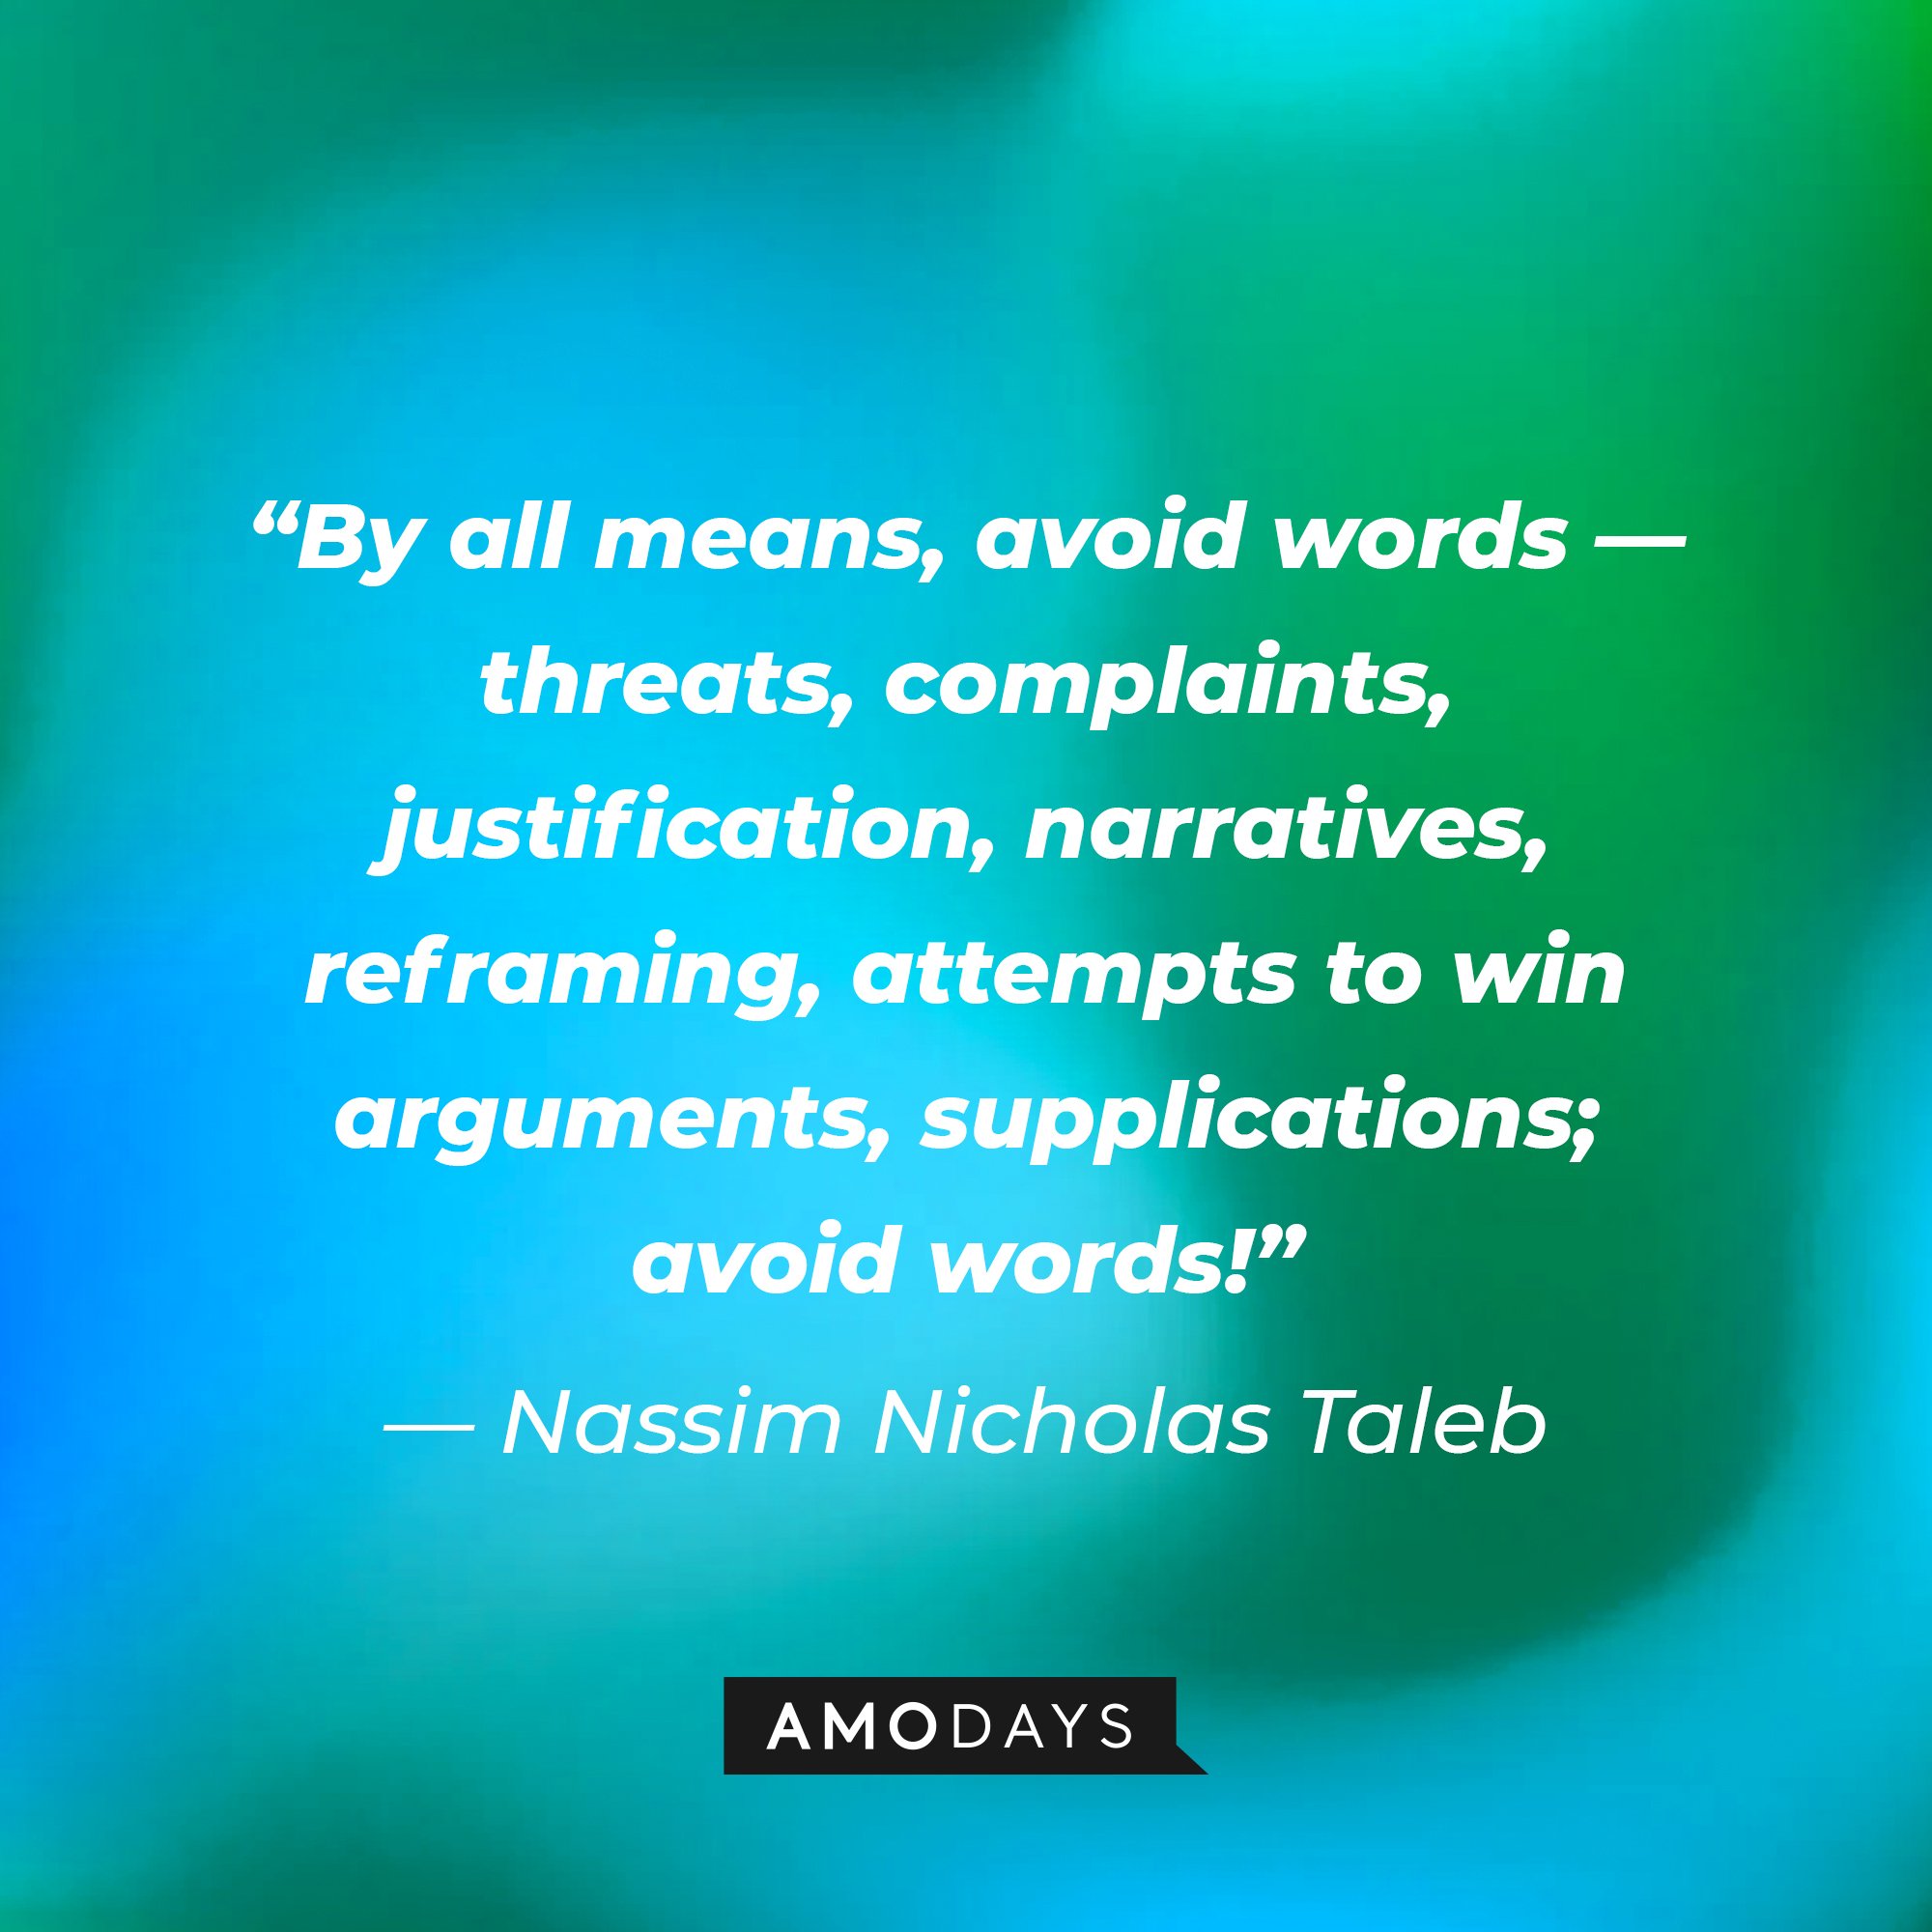 Nassim Nicholas Taleb's quote: “By all means, avoid words — threats, complaints, justification, narratives, reframing, attempts to win arguments, supplications; avoid words!” | Image: AmoDays